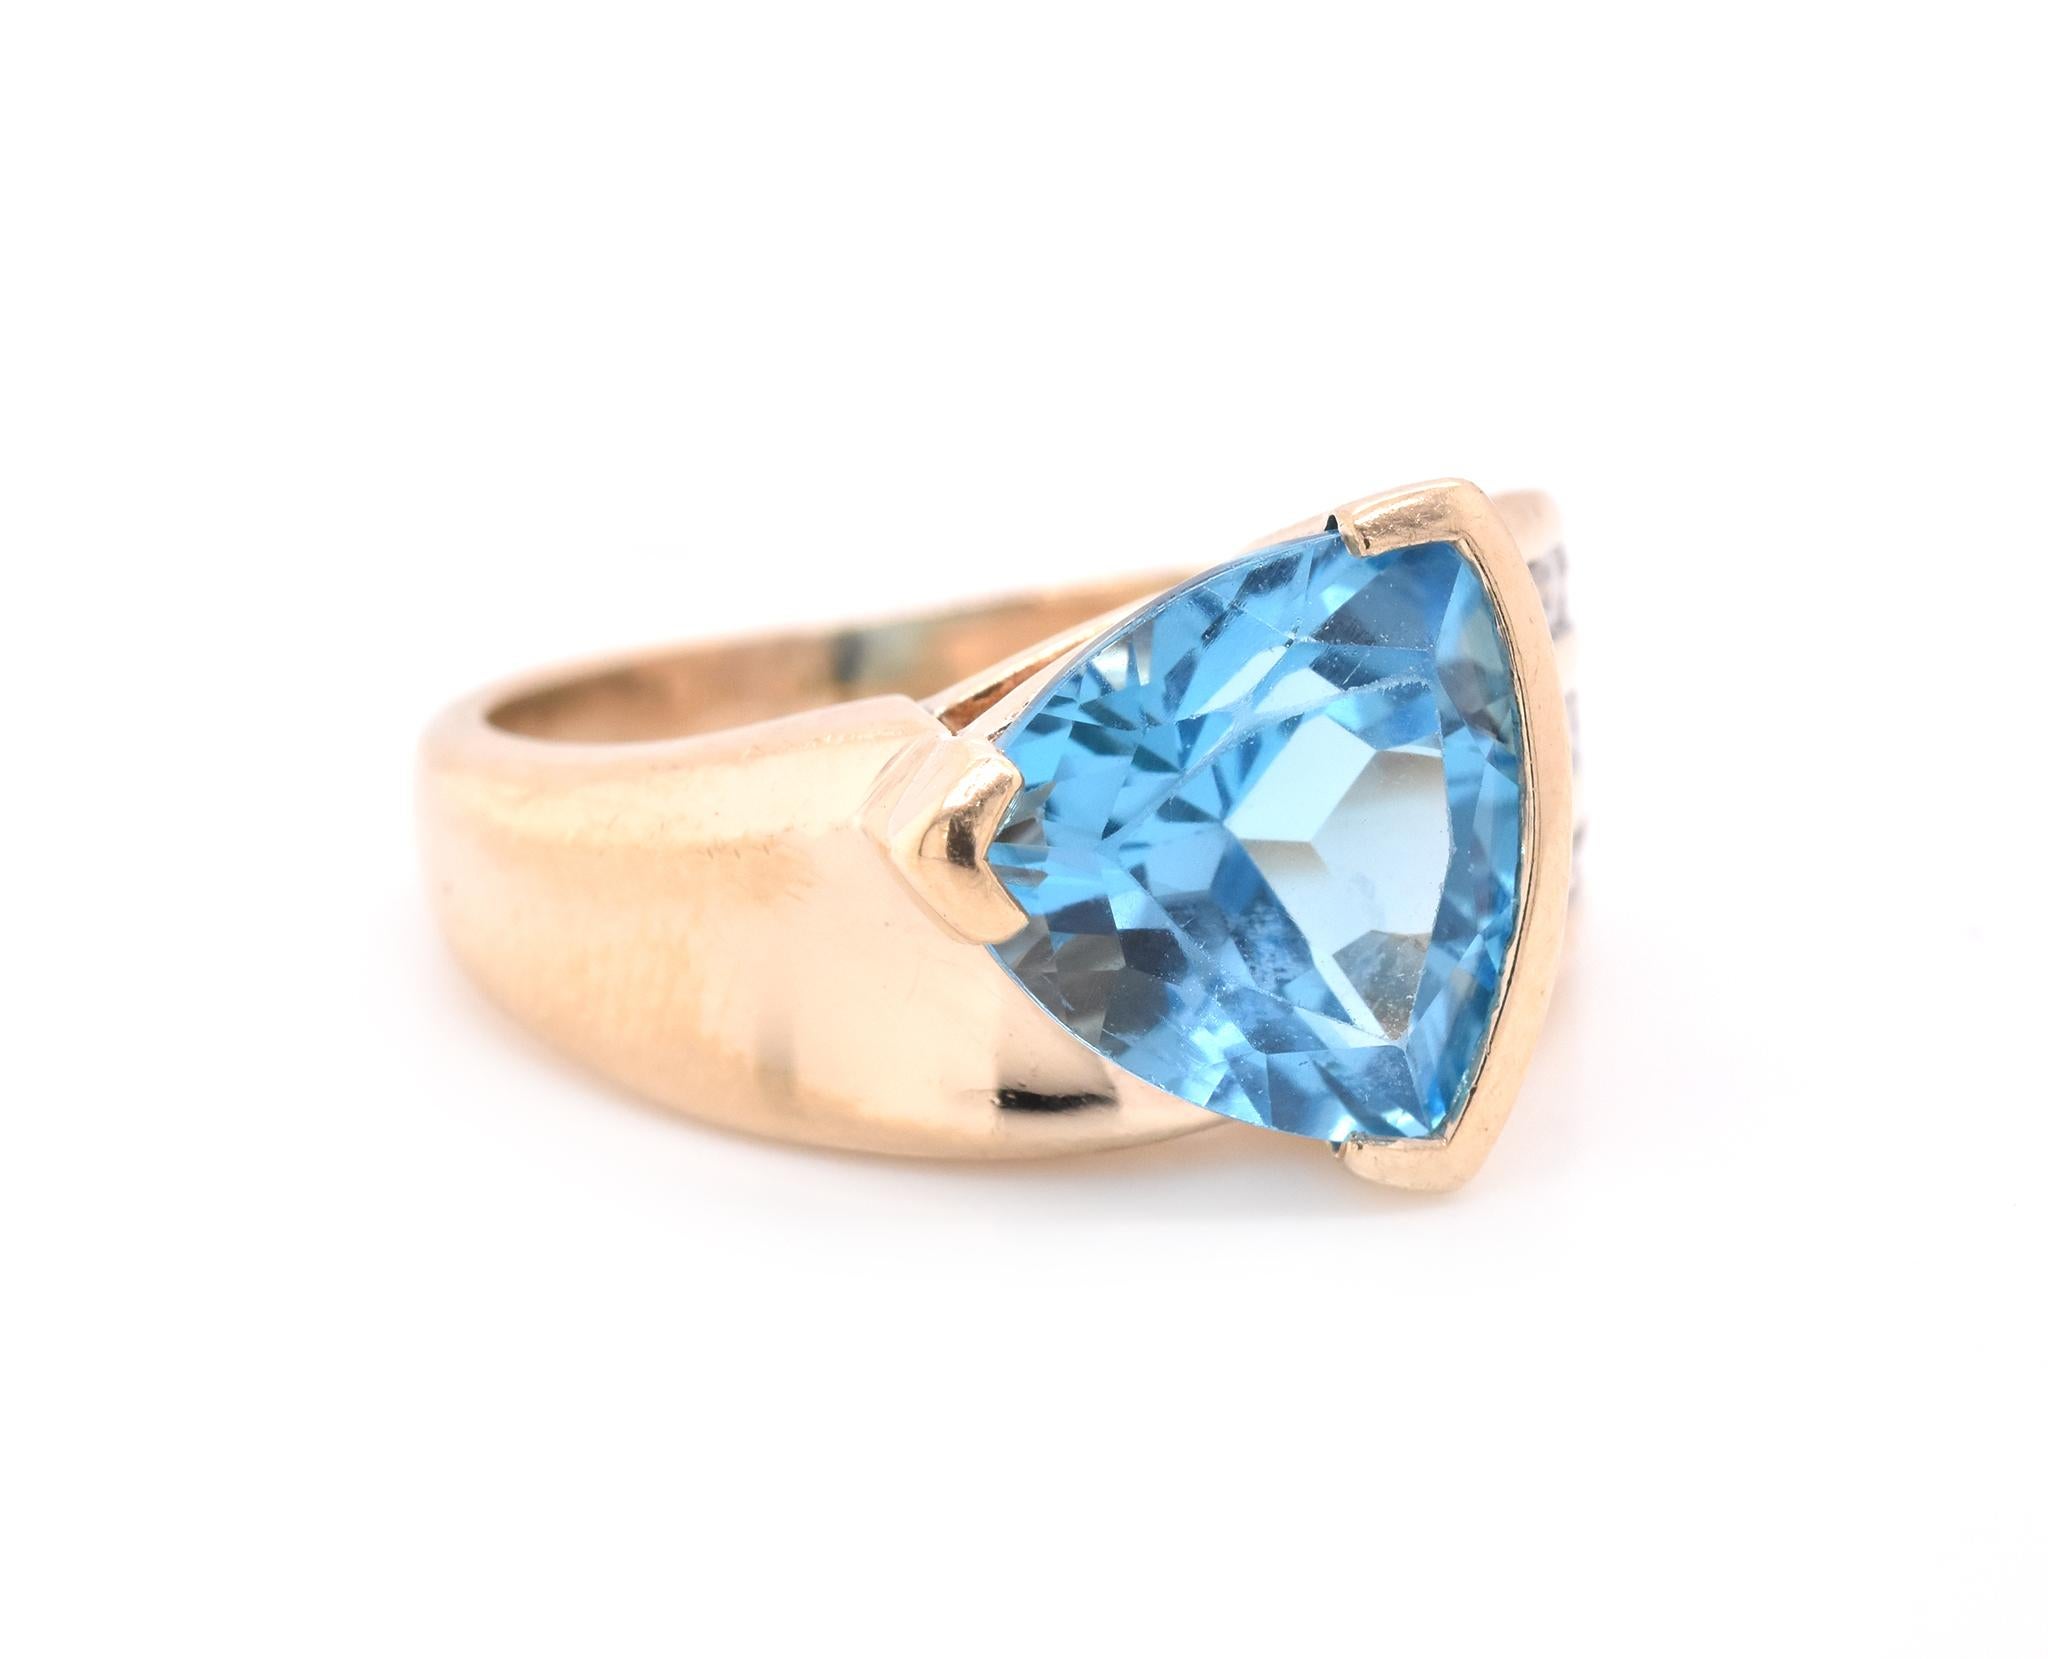 Material: 14k yellow gold
Gemstone: 1 Brilliant Trillion Cut Blue Topaz
Diamonds: 15 round brilliant cuts = 0.30cttw
Color: G
Clarity: SI2-I1
Ring Size: 5 ½  (allow up to two additional business days for sizing requests)
Dimensions: ring top